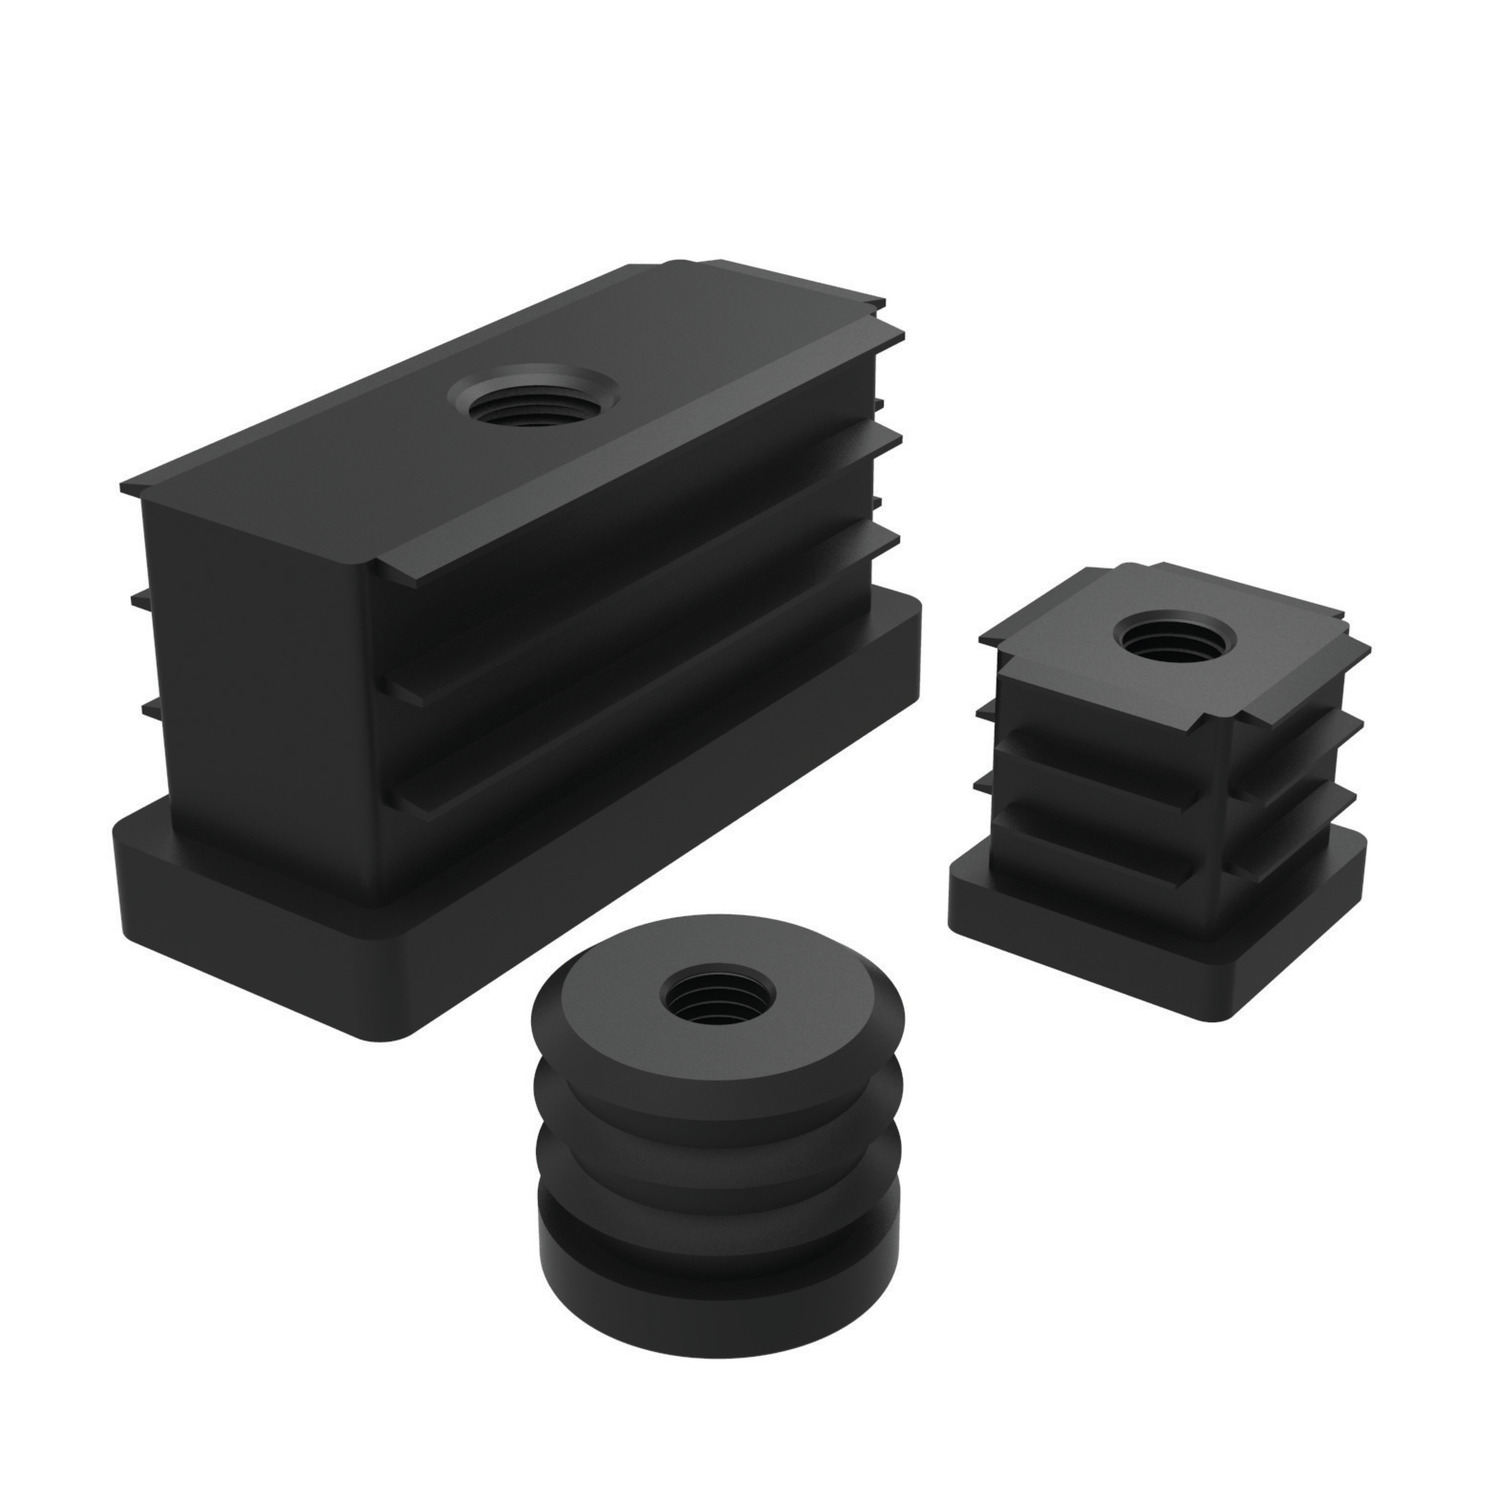 34680.W0220 Thrd. Plastic Inserts for Hollow Section Thermoplastic - Round -  20 - M10